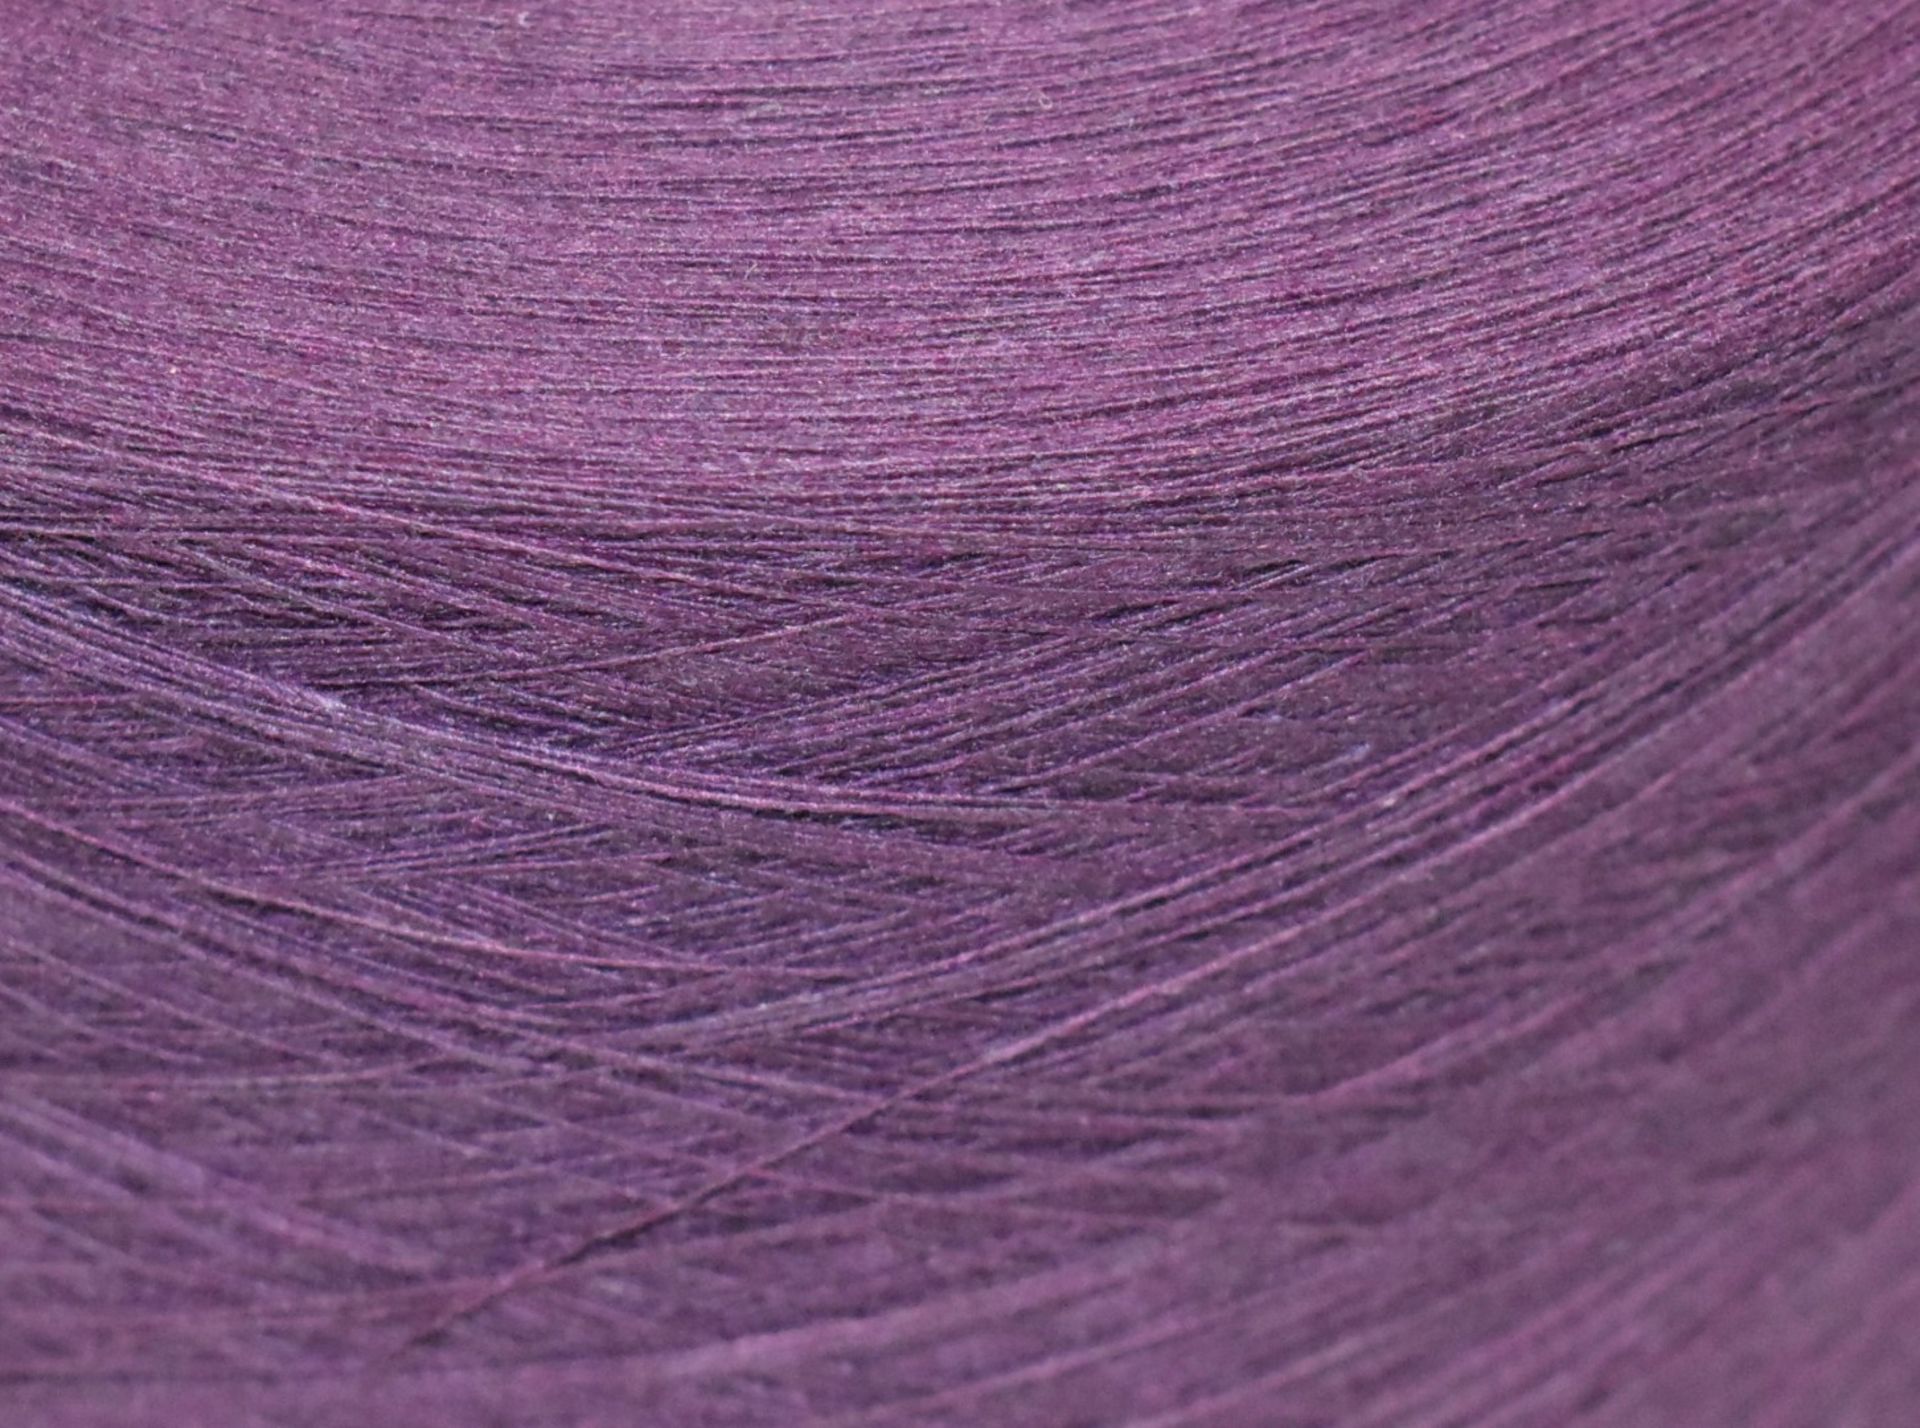 1 x Cone of 1/13 MicroCotton Knitting Yarn - Purple - Approx Weight: 2,300g - New Stock ABL Yarn - Image 3 of 10